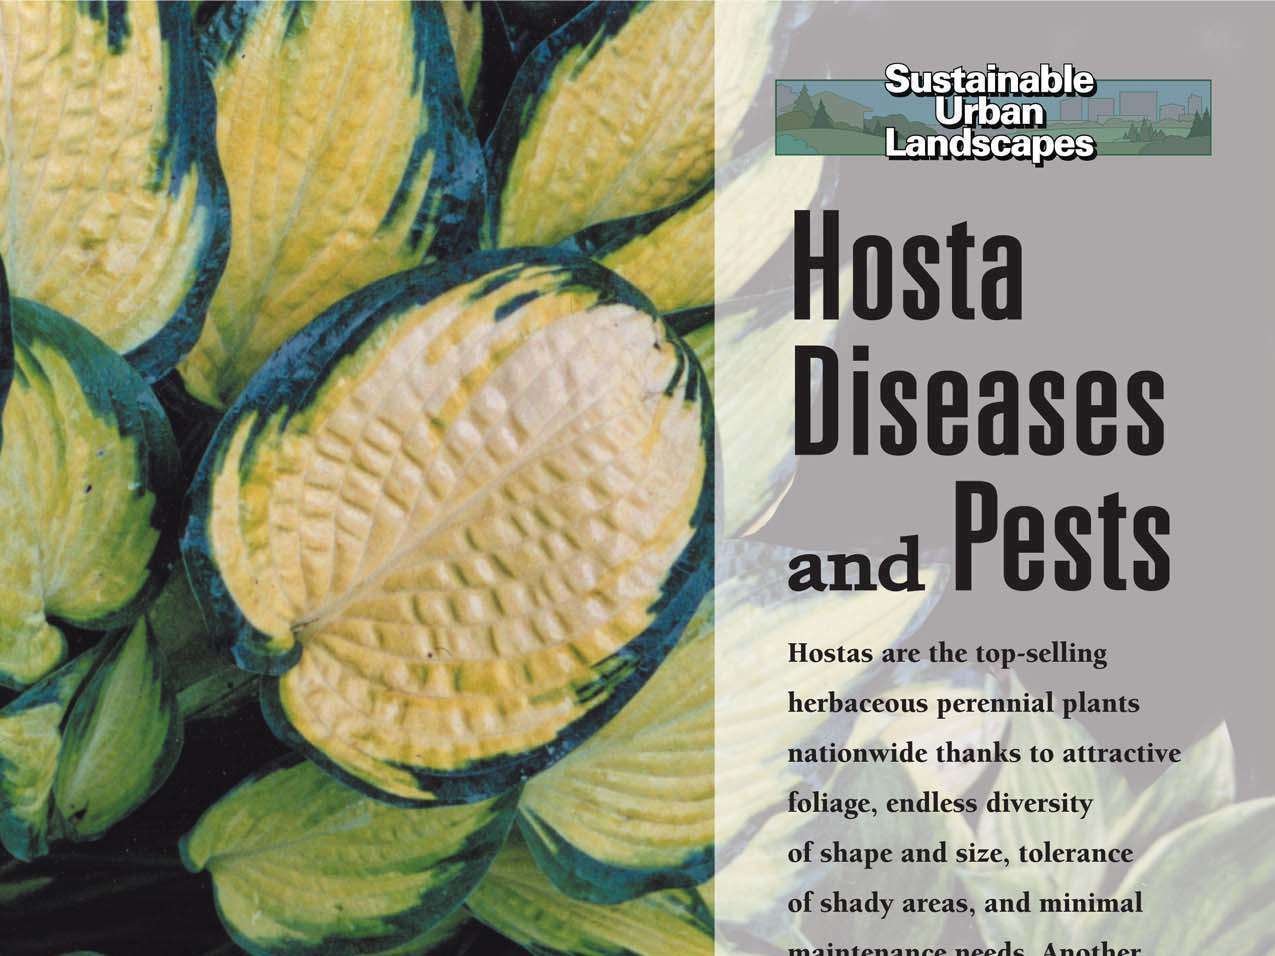 Hosta Diseases and Pests